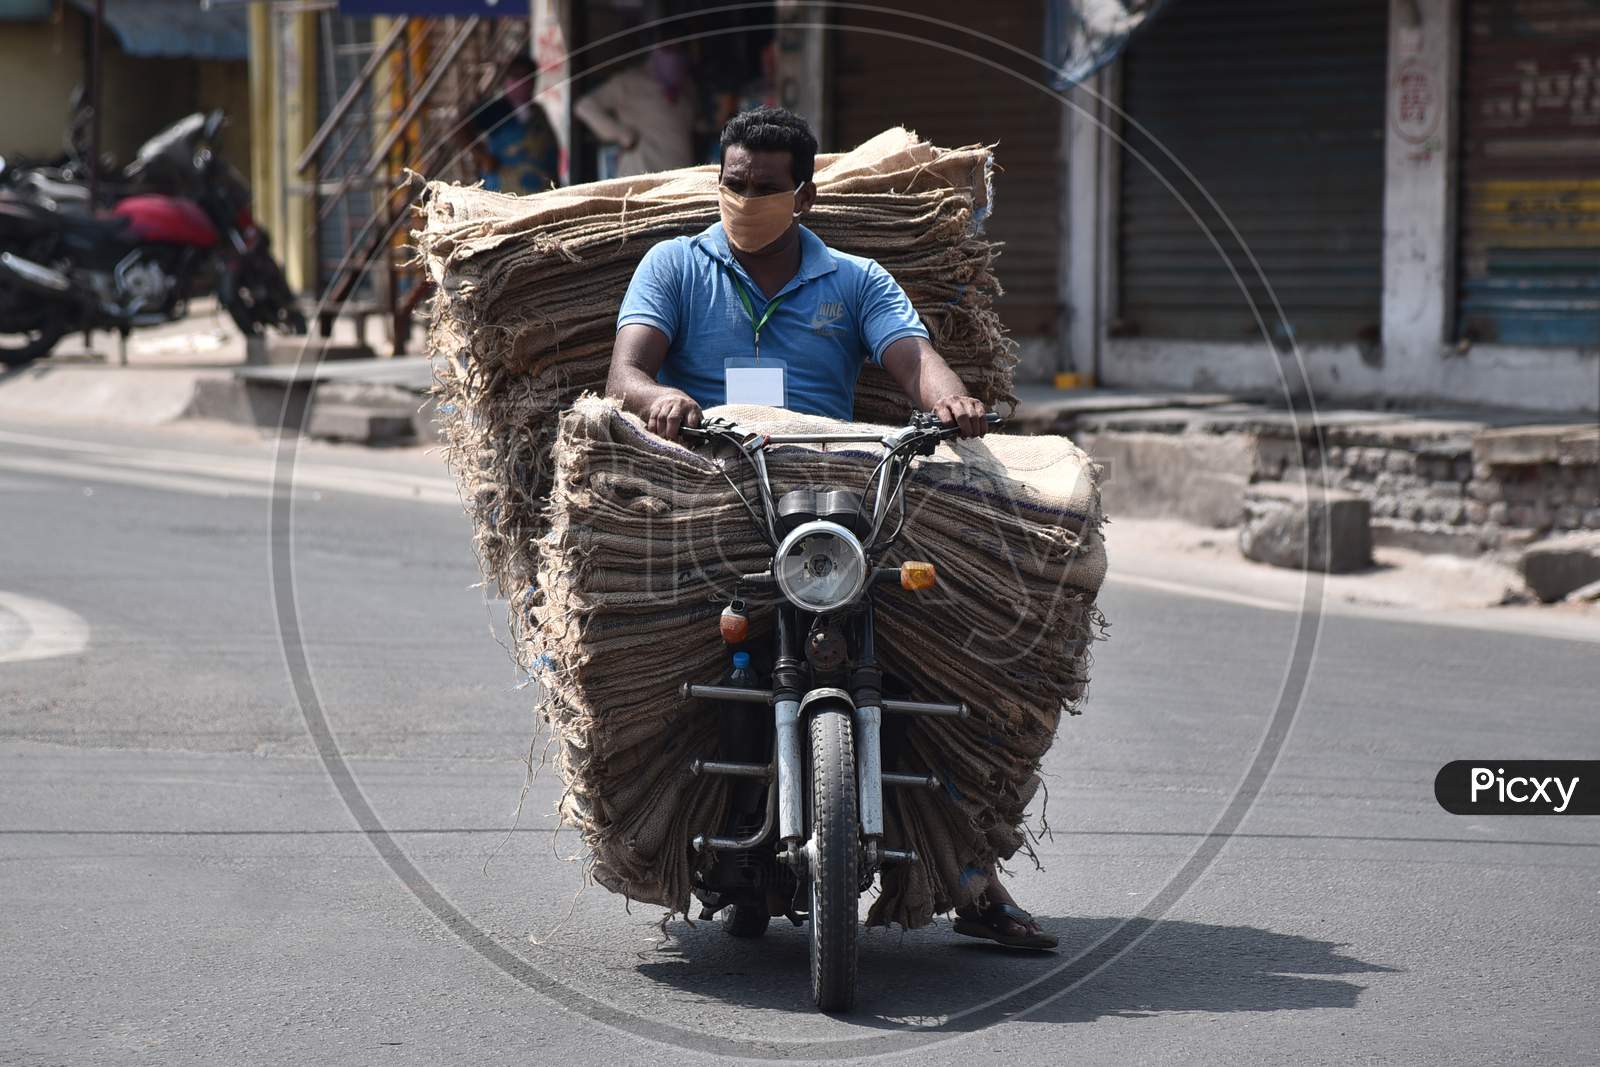 A Man Carries A Pile Of Gunny Bags On A Two-Wheeler During The Nationwide Lockdown Amid Coronavirus Pandemic In Vijayawada.